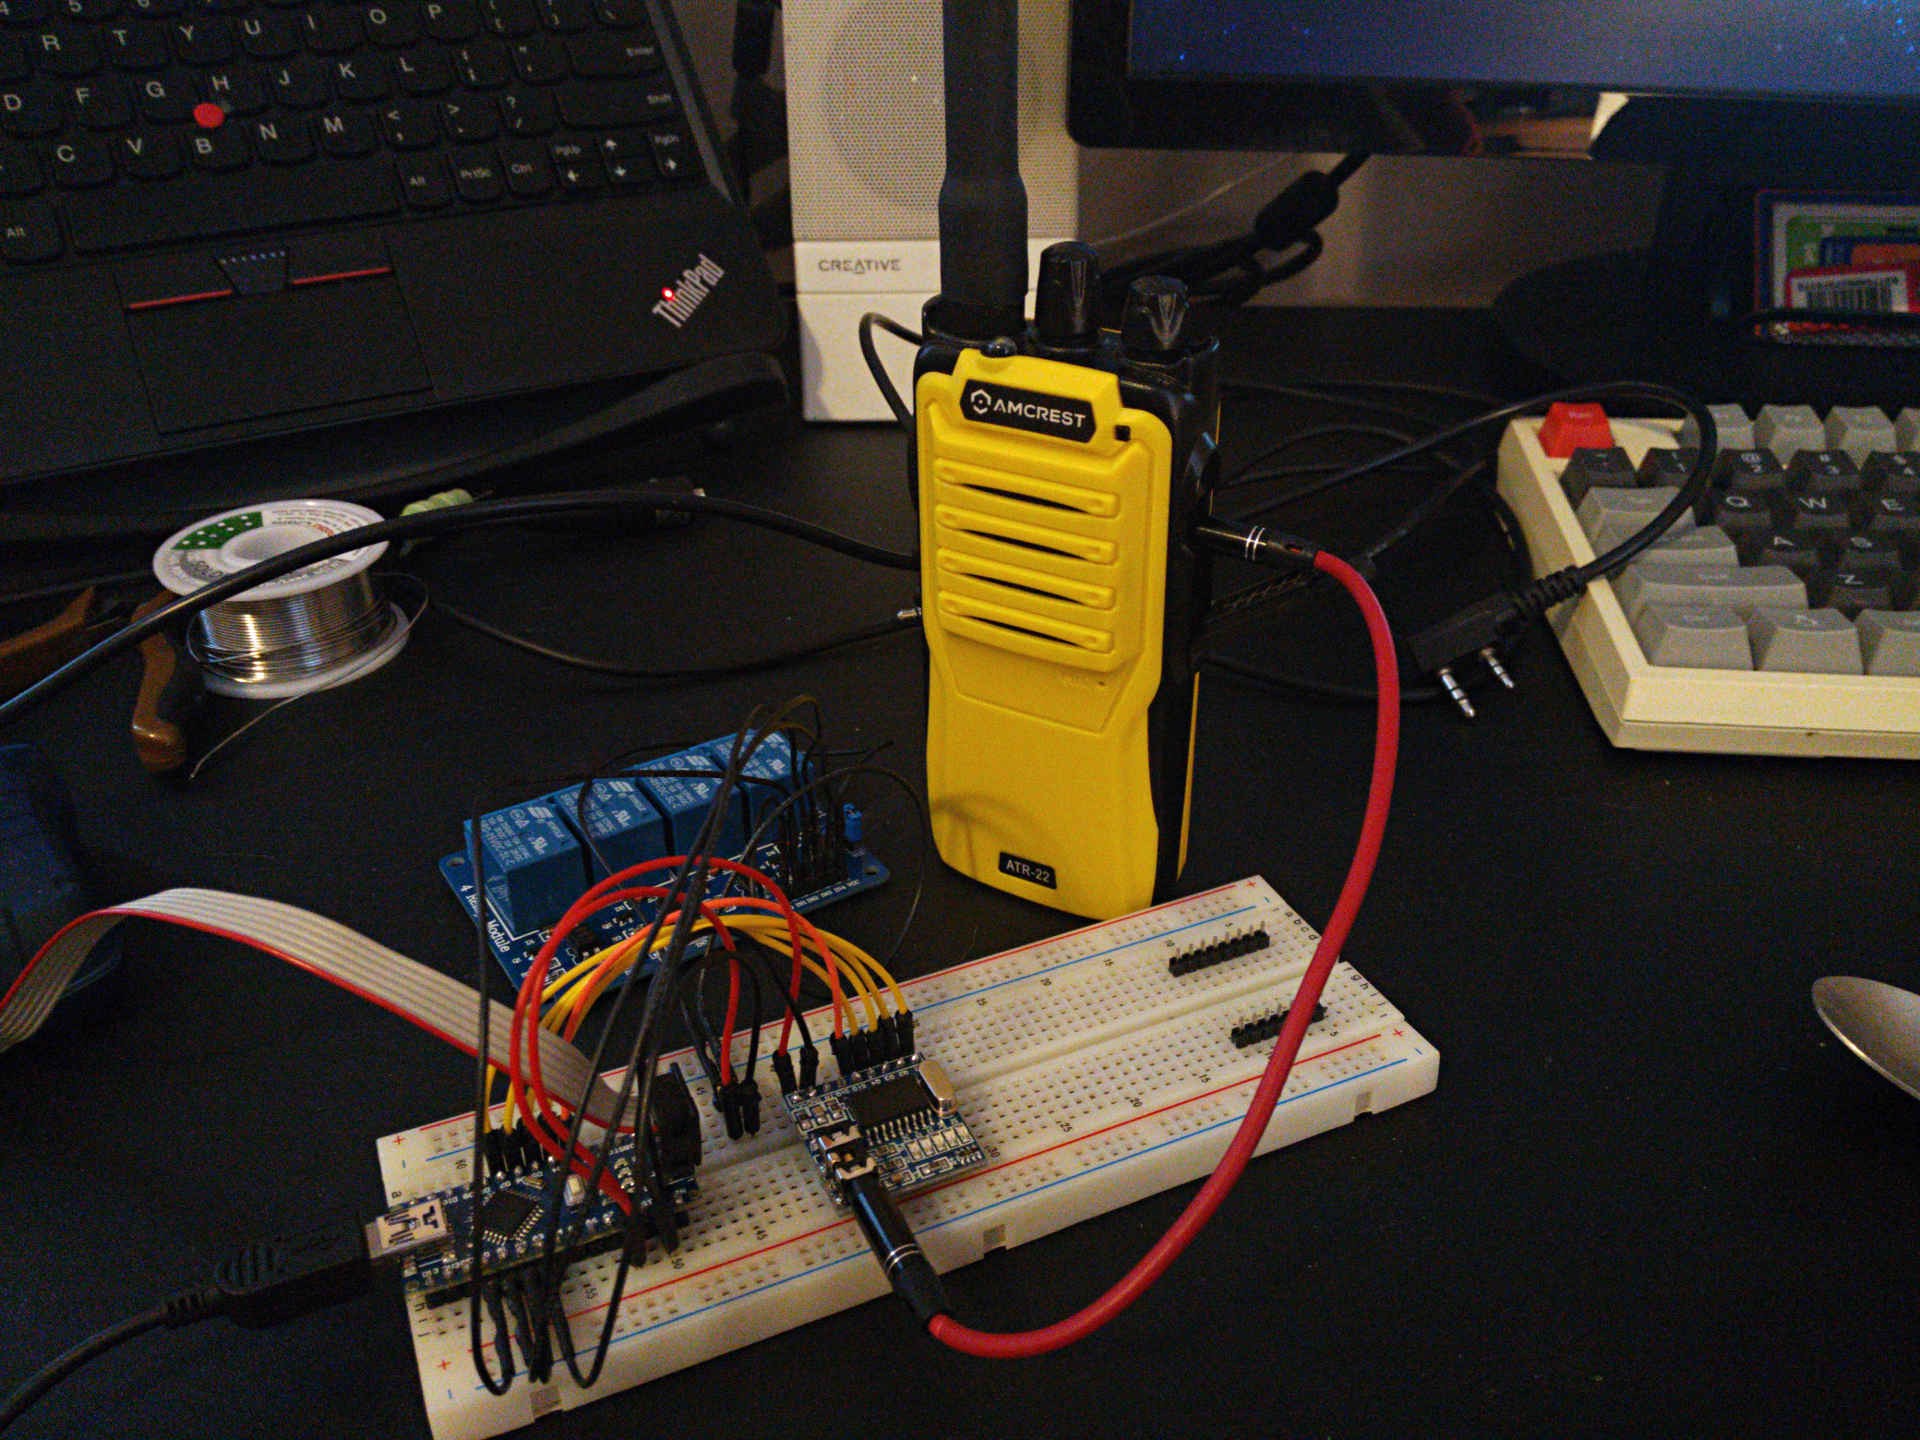 Test breadboard with radio attached